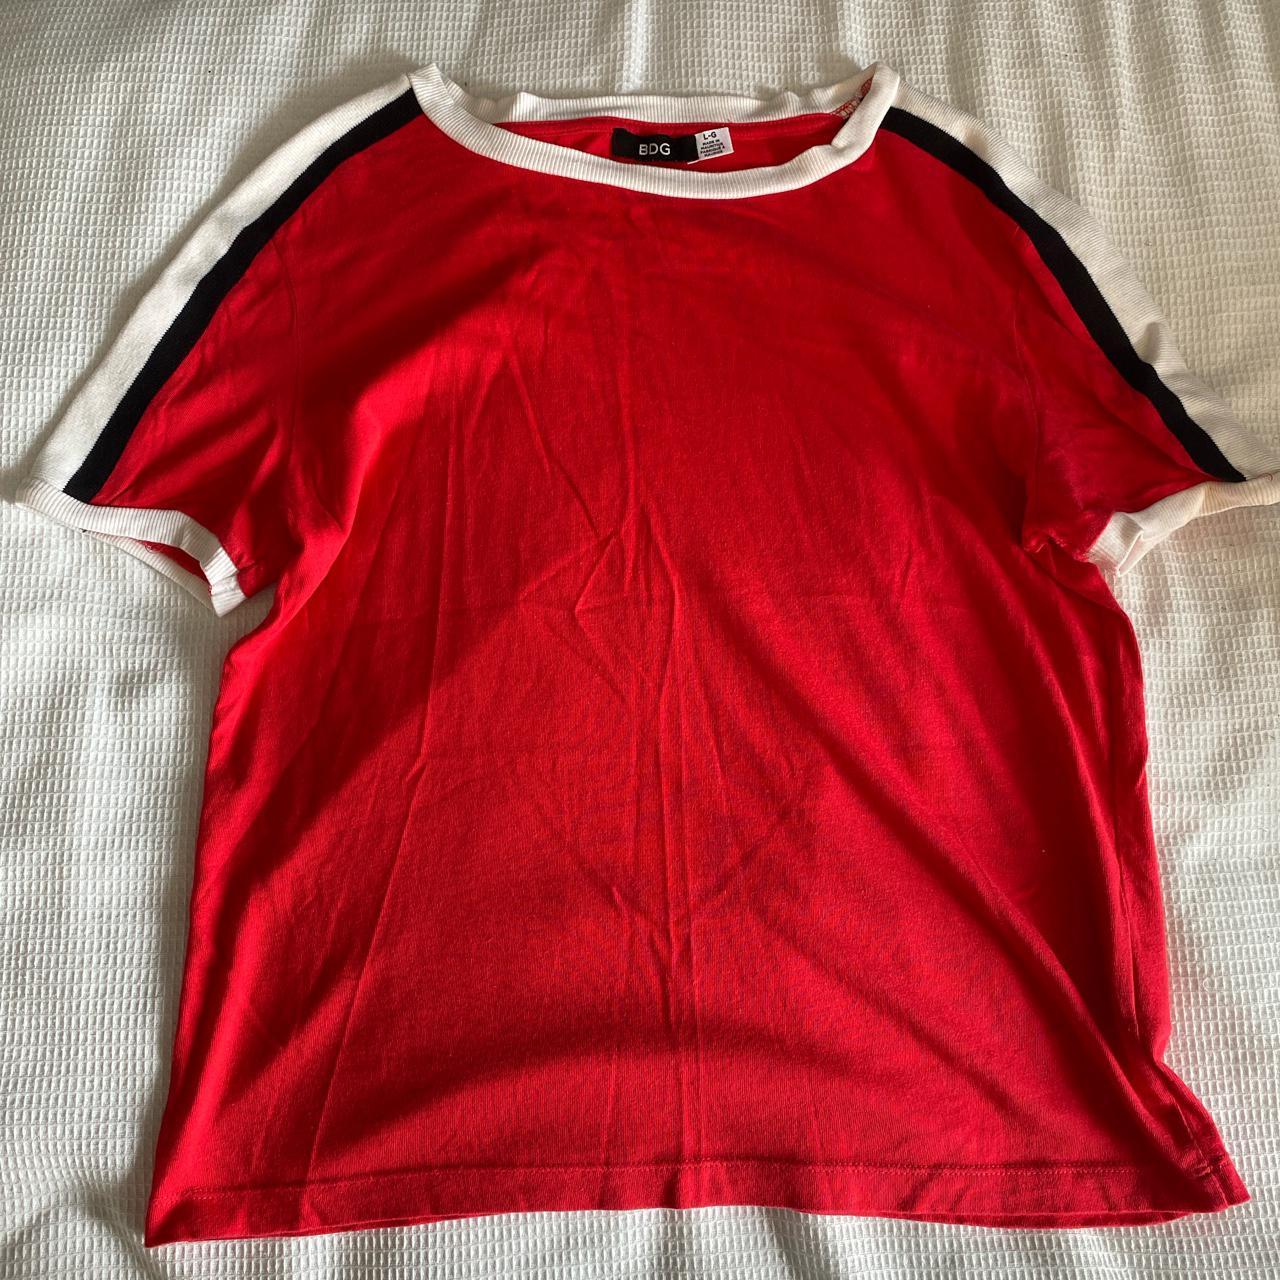 Urban ringer tee Red stretch ringer tee from urban... - Depop